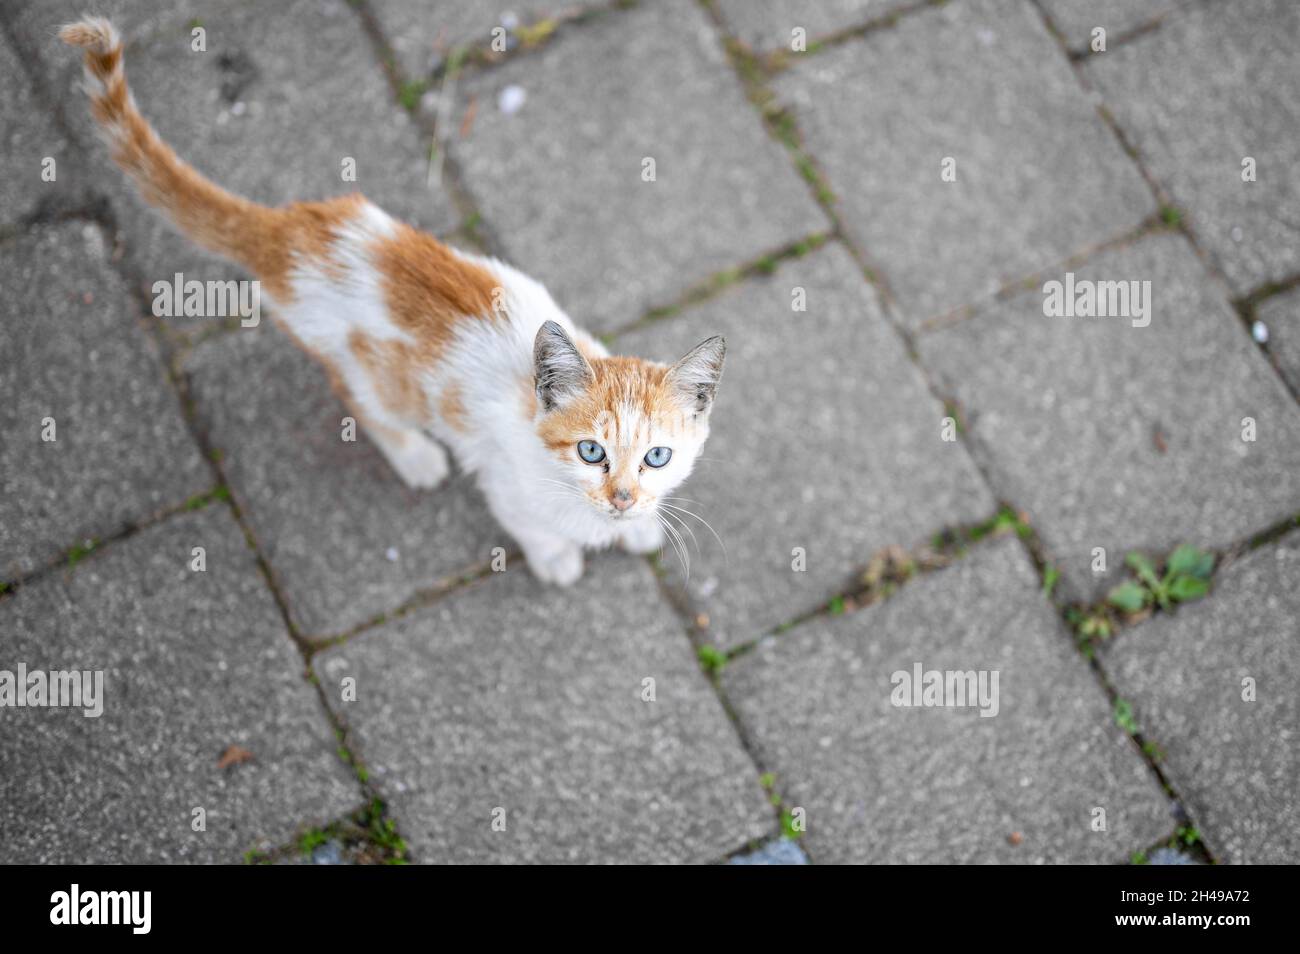 problem of stray animals, the concept of a shelter for stray cats. Stray cat begging for food. Homeless animals. Stock Photo